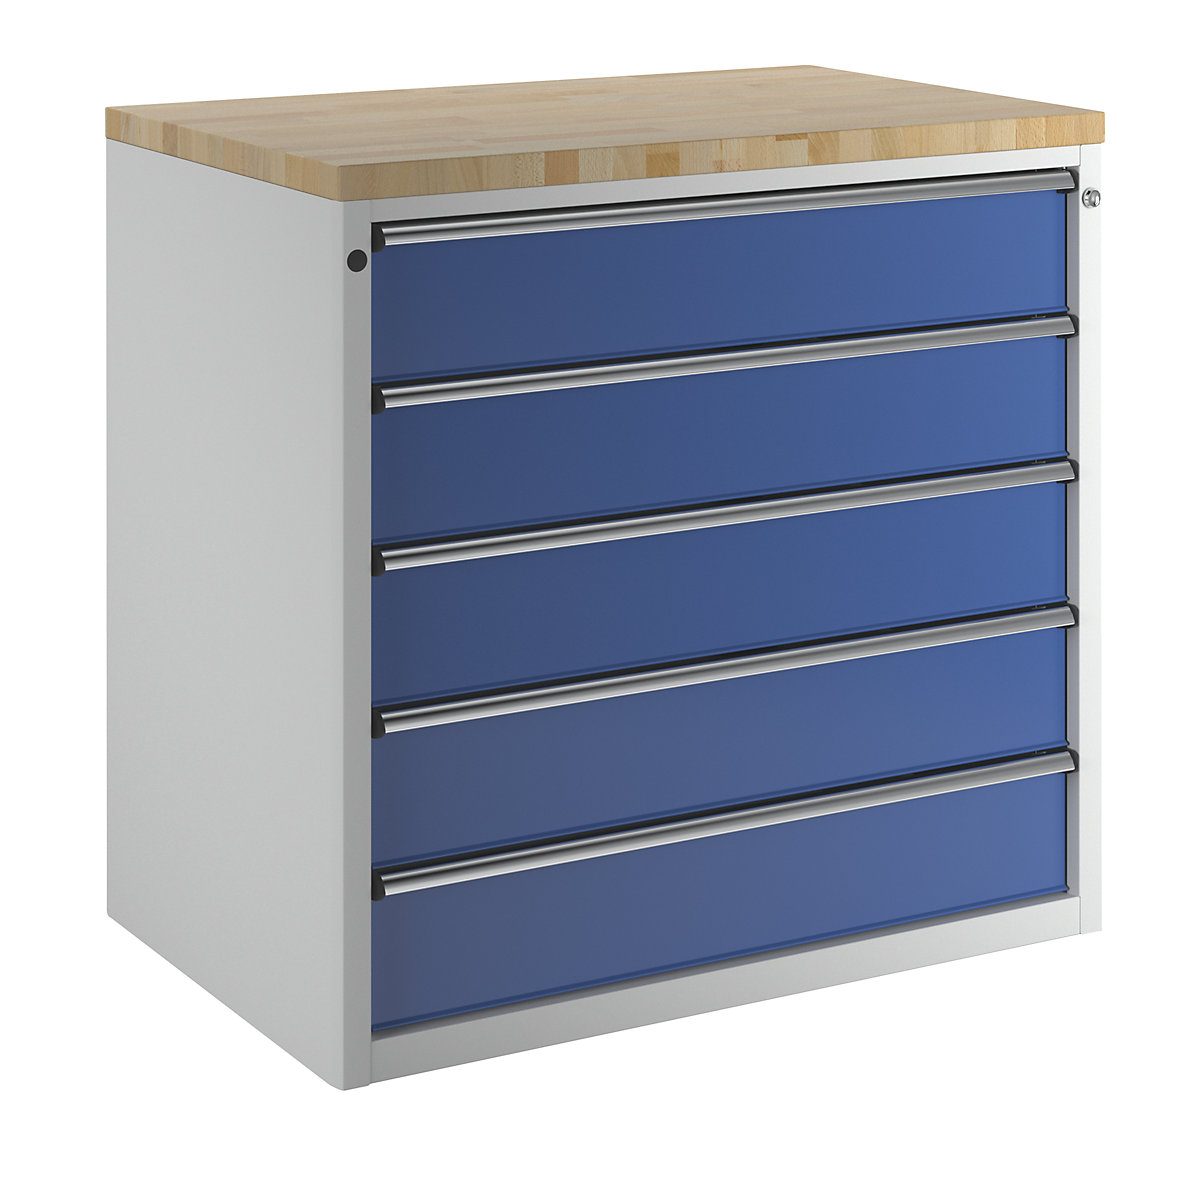 Cabinet for material and tool dispensing counter - ANKE